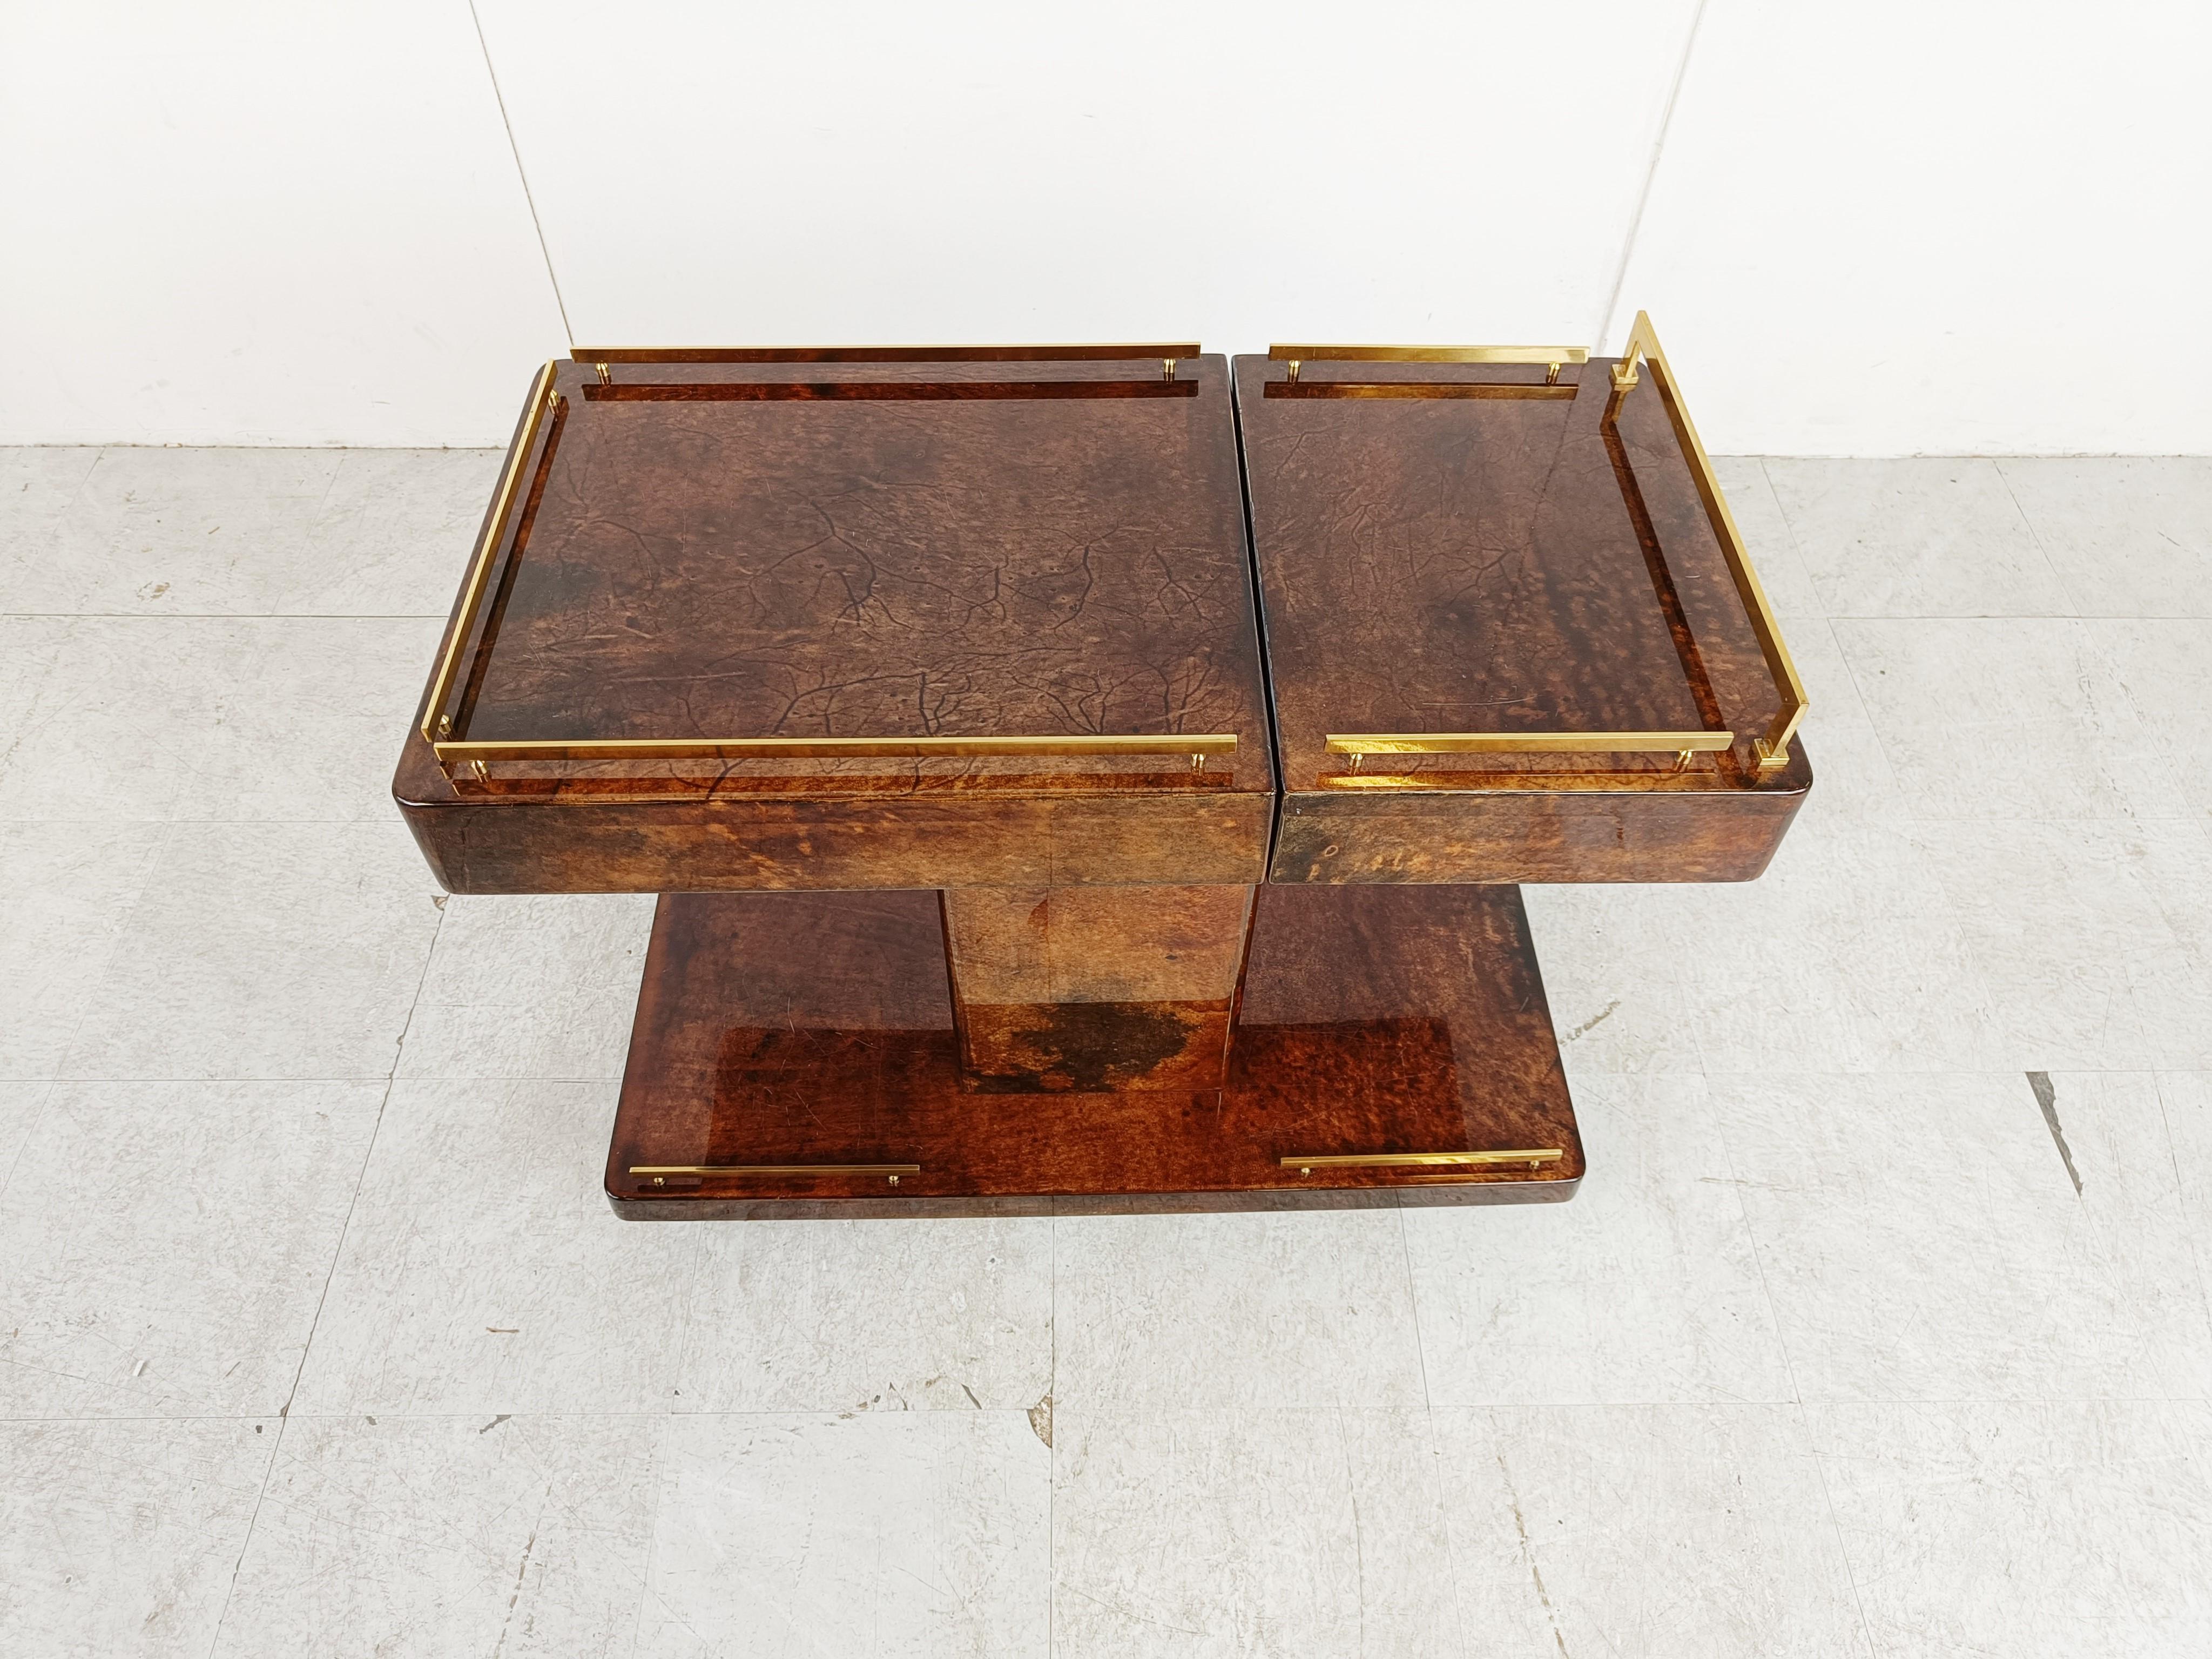 Very rare hidden bar Aldo Tura Goatskin or parchment bar cart. This bar cart was made in Italy in the 1960s. 

Constructed of thickly lacquered goatskin / parchment and gilt metal hardware. 

Can be used as drink trolley or side table.

The top